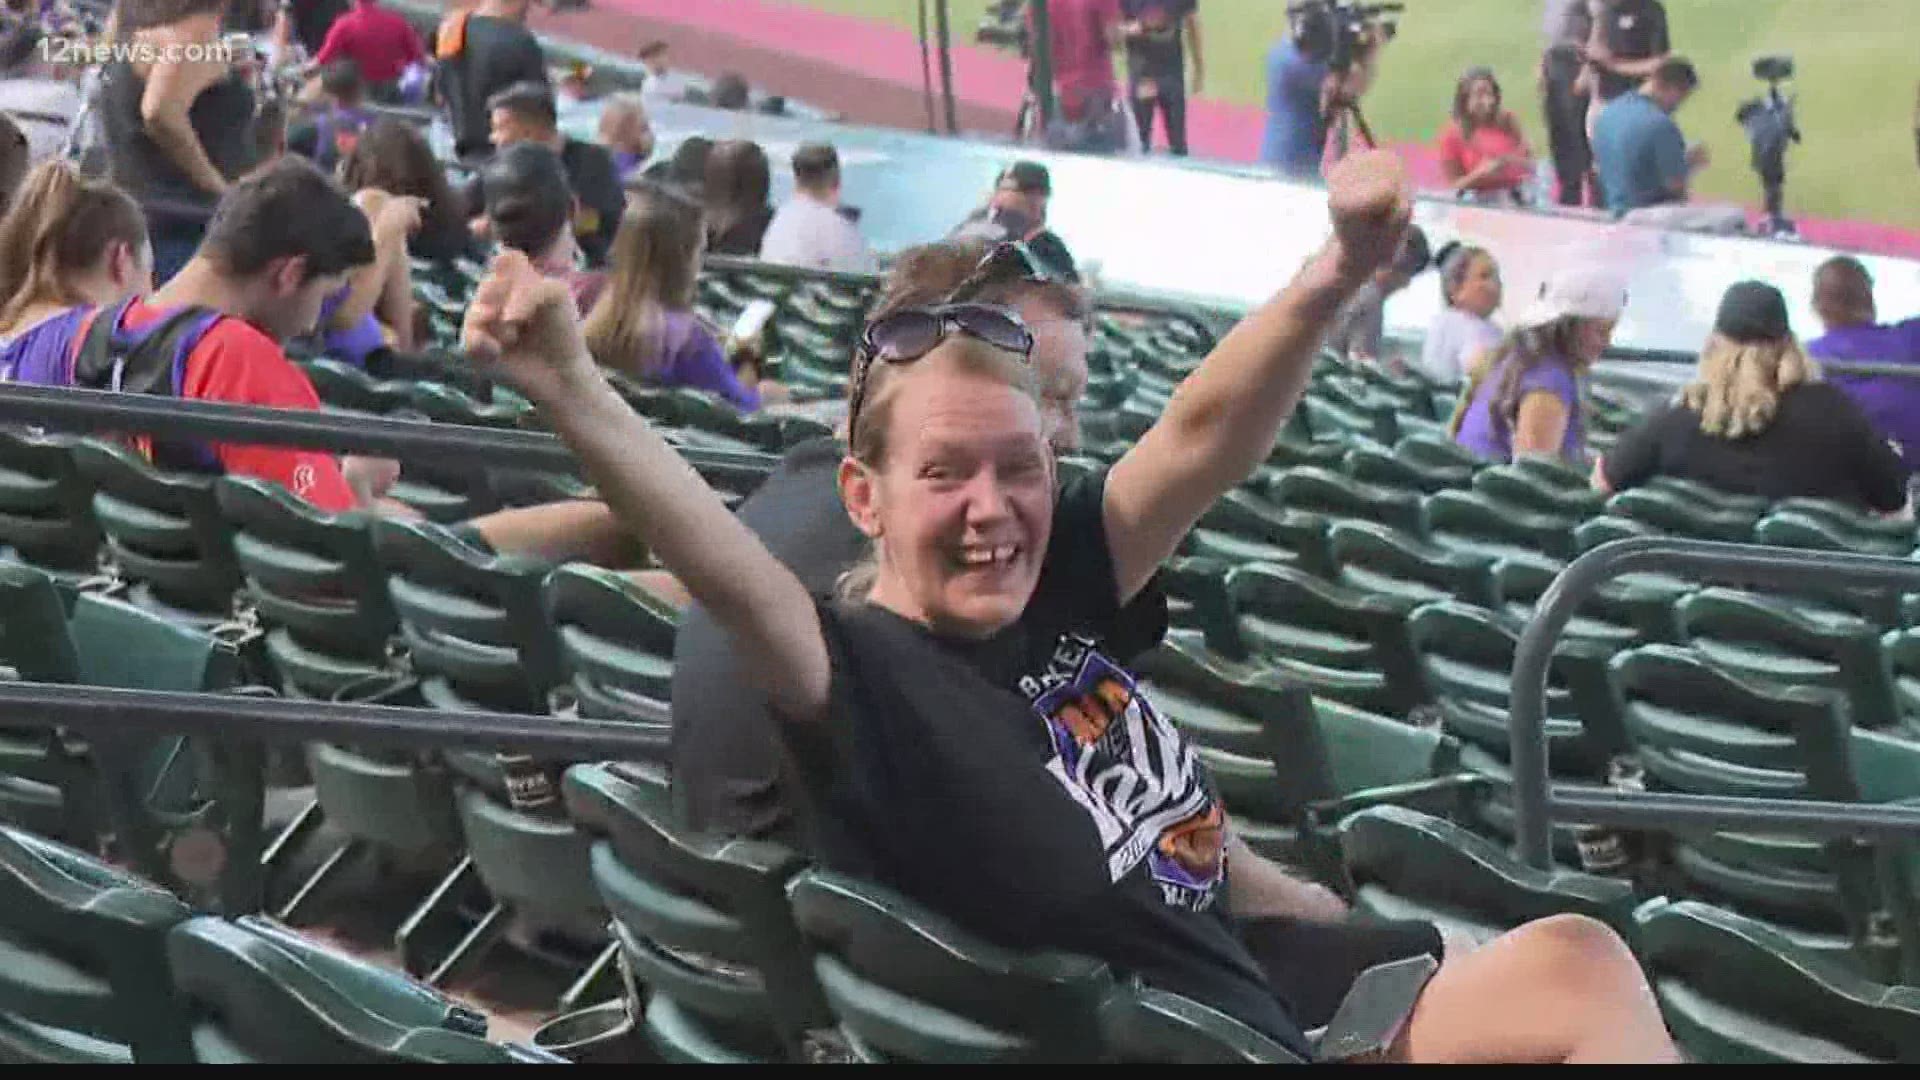 Ahead of Game 4 of the NBA Finals, Suns fans from Chase Field to Phoenix Children's Hospital are Rallying the Valley in hopes of getting a third win for Phoenix.